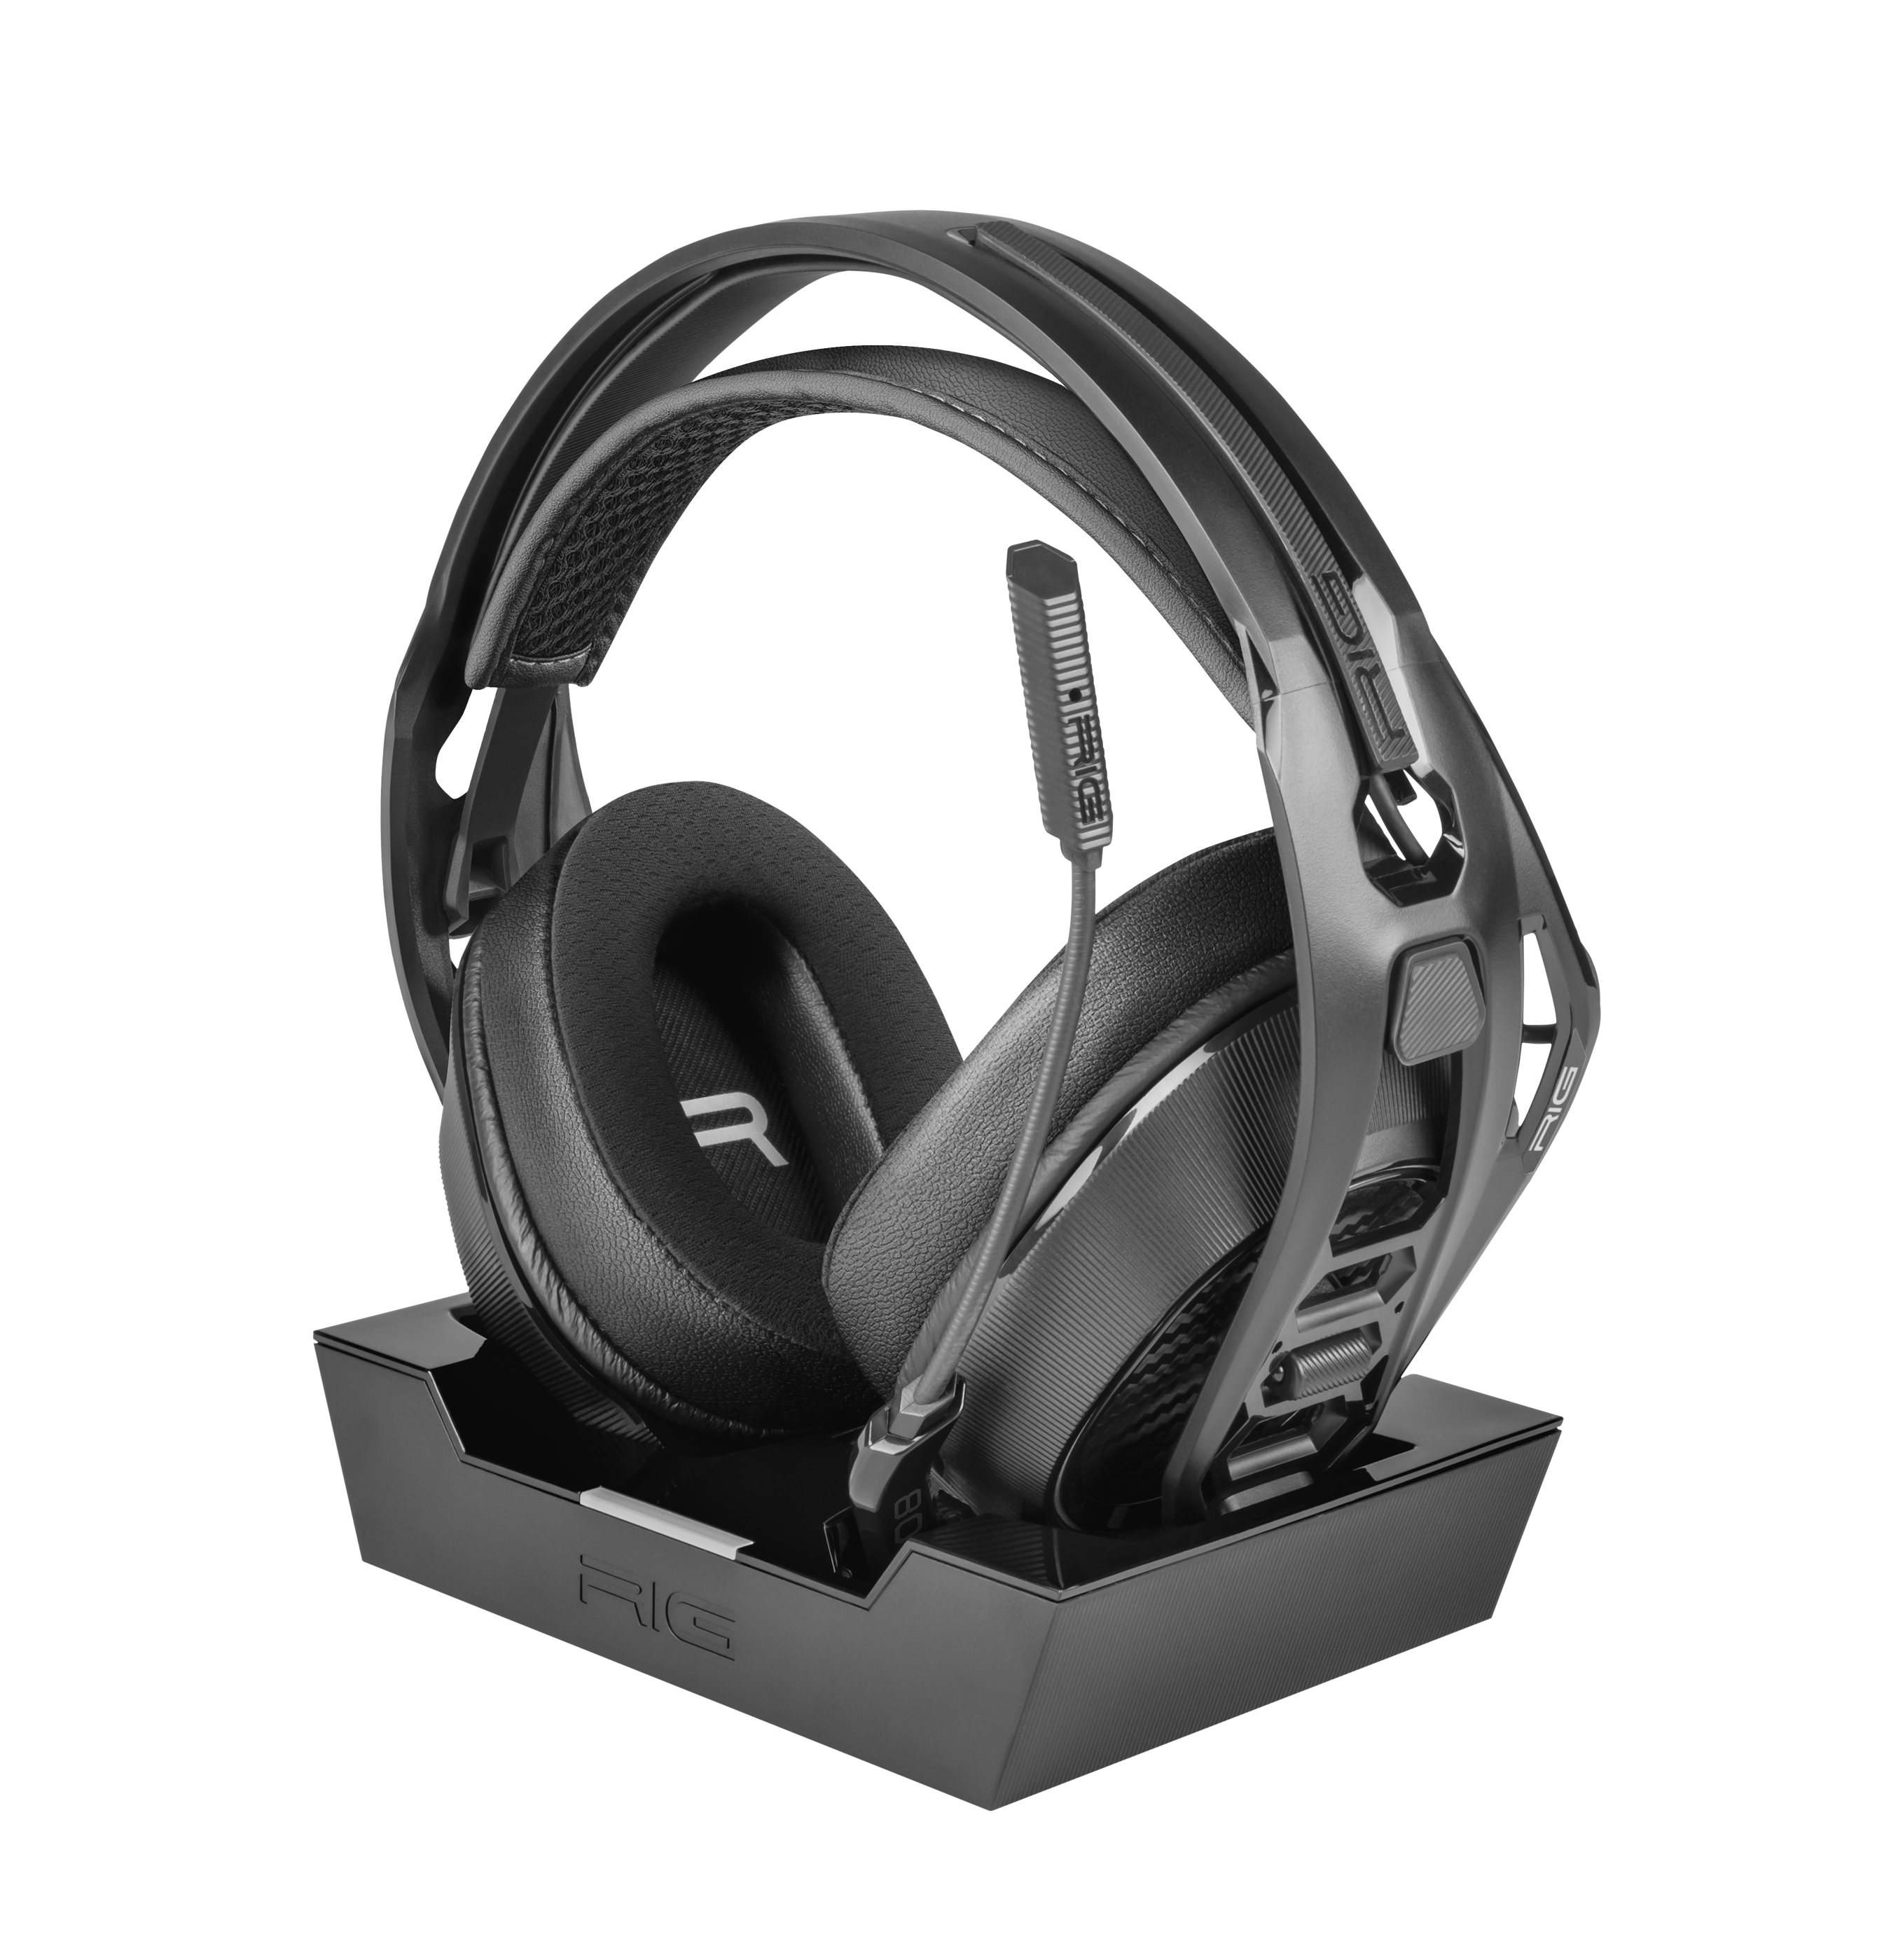 RIG 800 PRO HS gaming headset and docking station